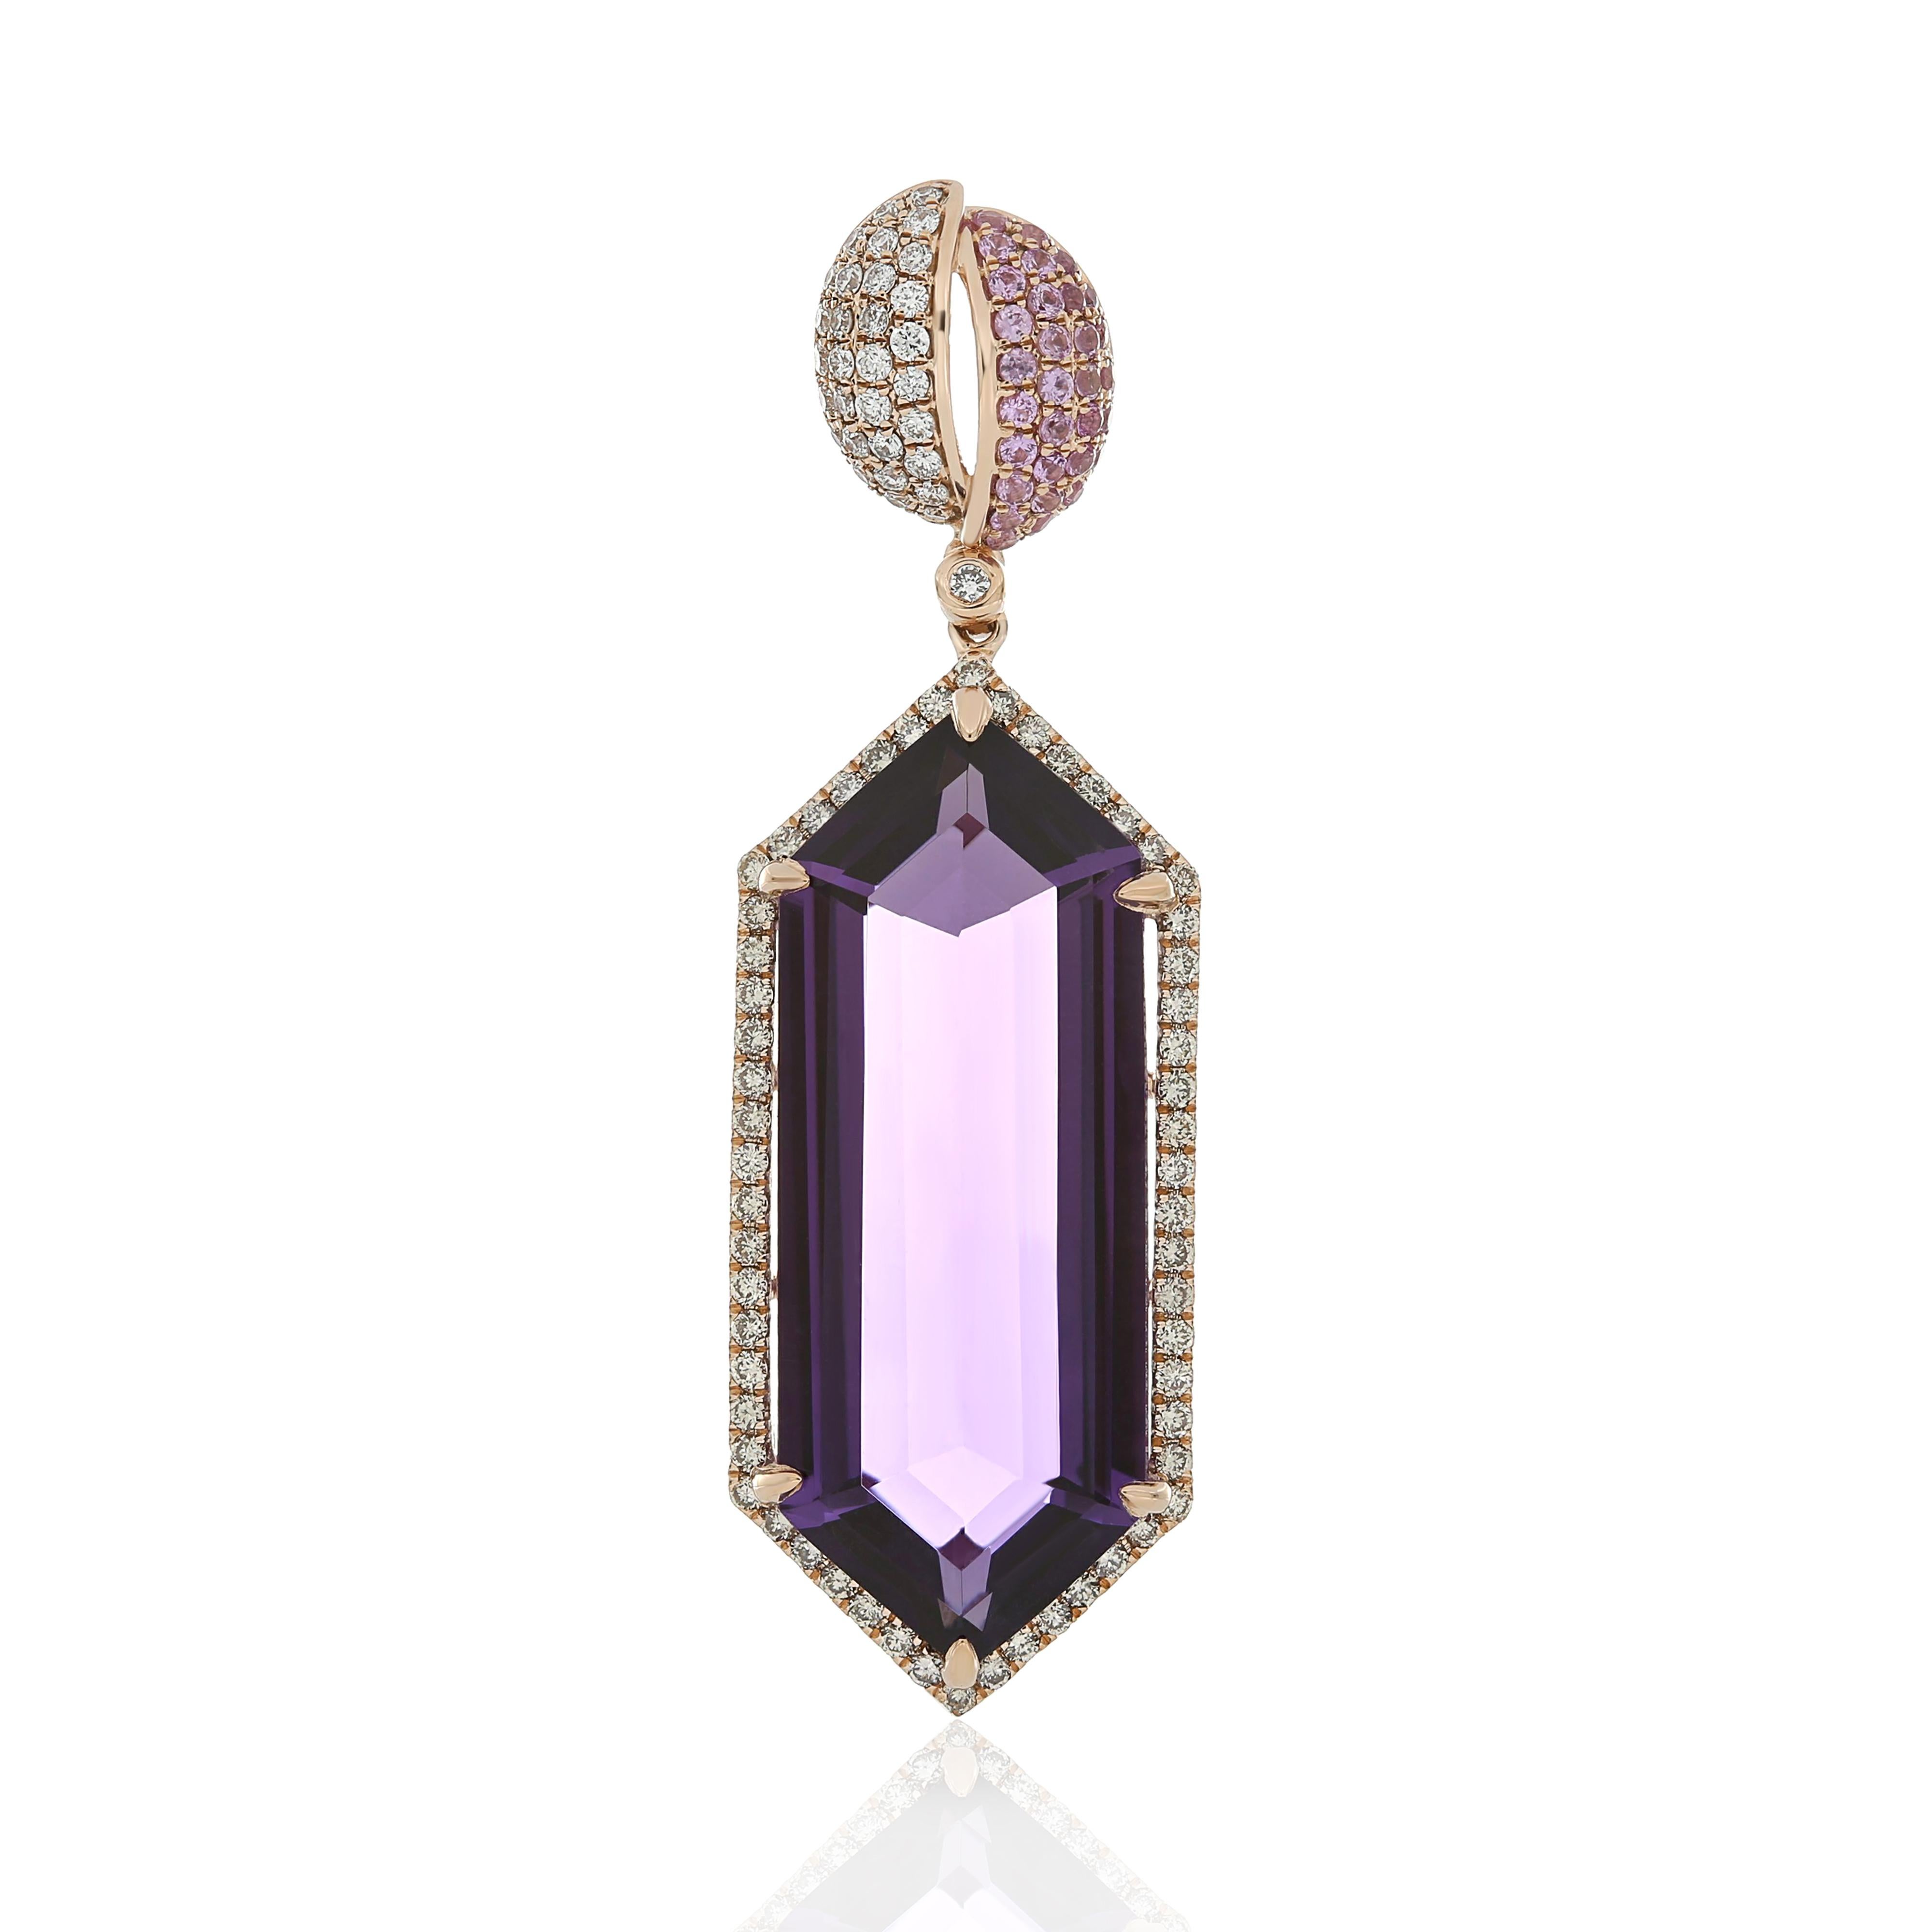 Elegant and exquisitely detailed 14 Karat Rose Gold Pendant, center set with 10.96Cts .Hexagon Shape Amethyst, Pink Sapphire with 0.18Cts and micro pave set Diamonds, weighing approx. 0.433Cts Beautifully Hand crafted in 14 Karat Rose Gold.

Stone